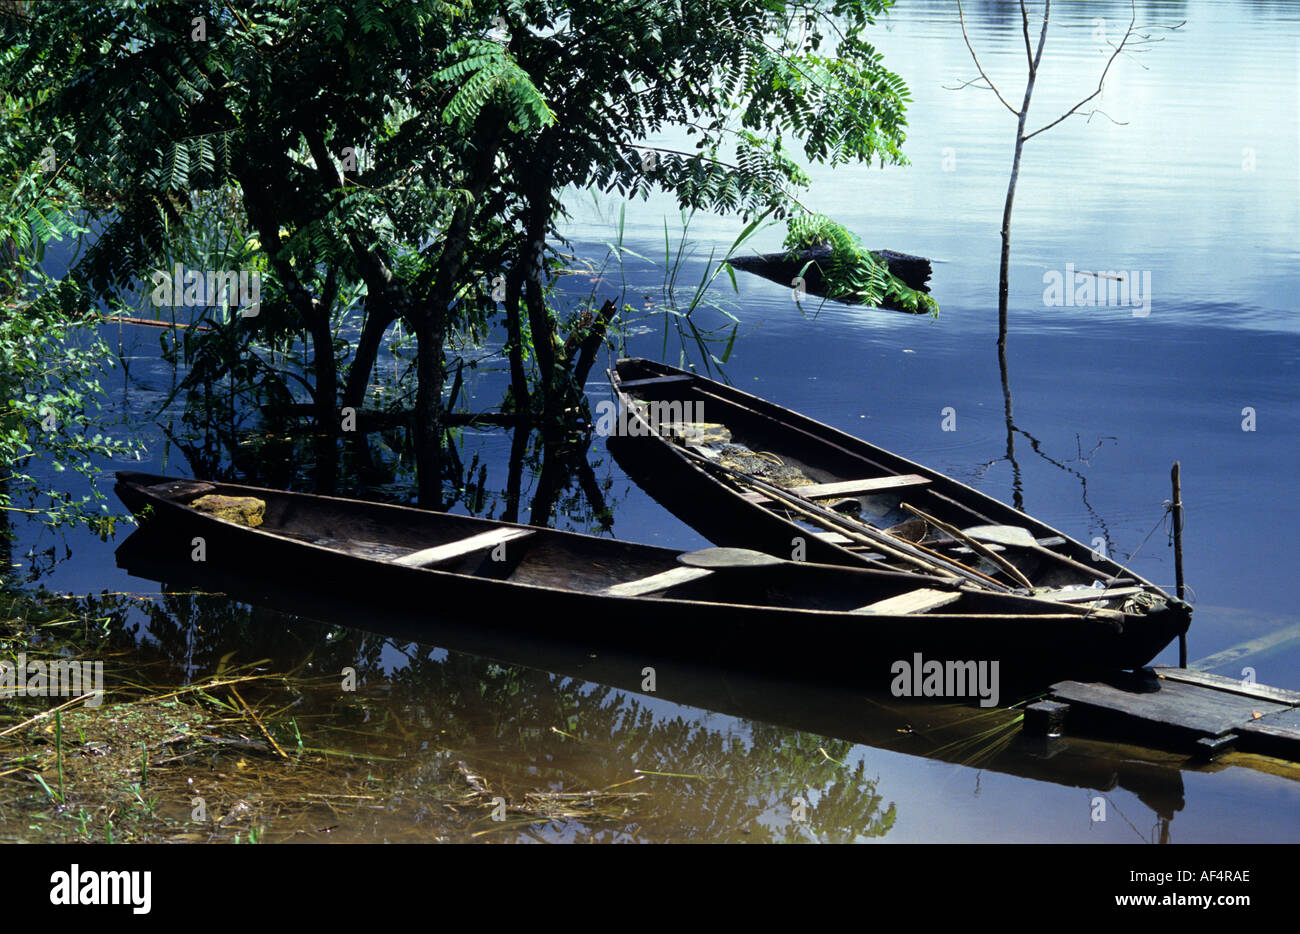 Two local dugout style canoes moored on still waters by a riverbank in rainforest scenery of the Amazon region of Brazil Stock Photo